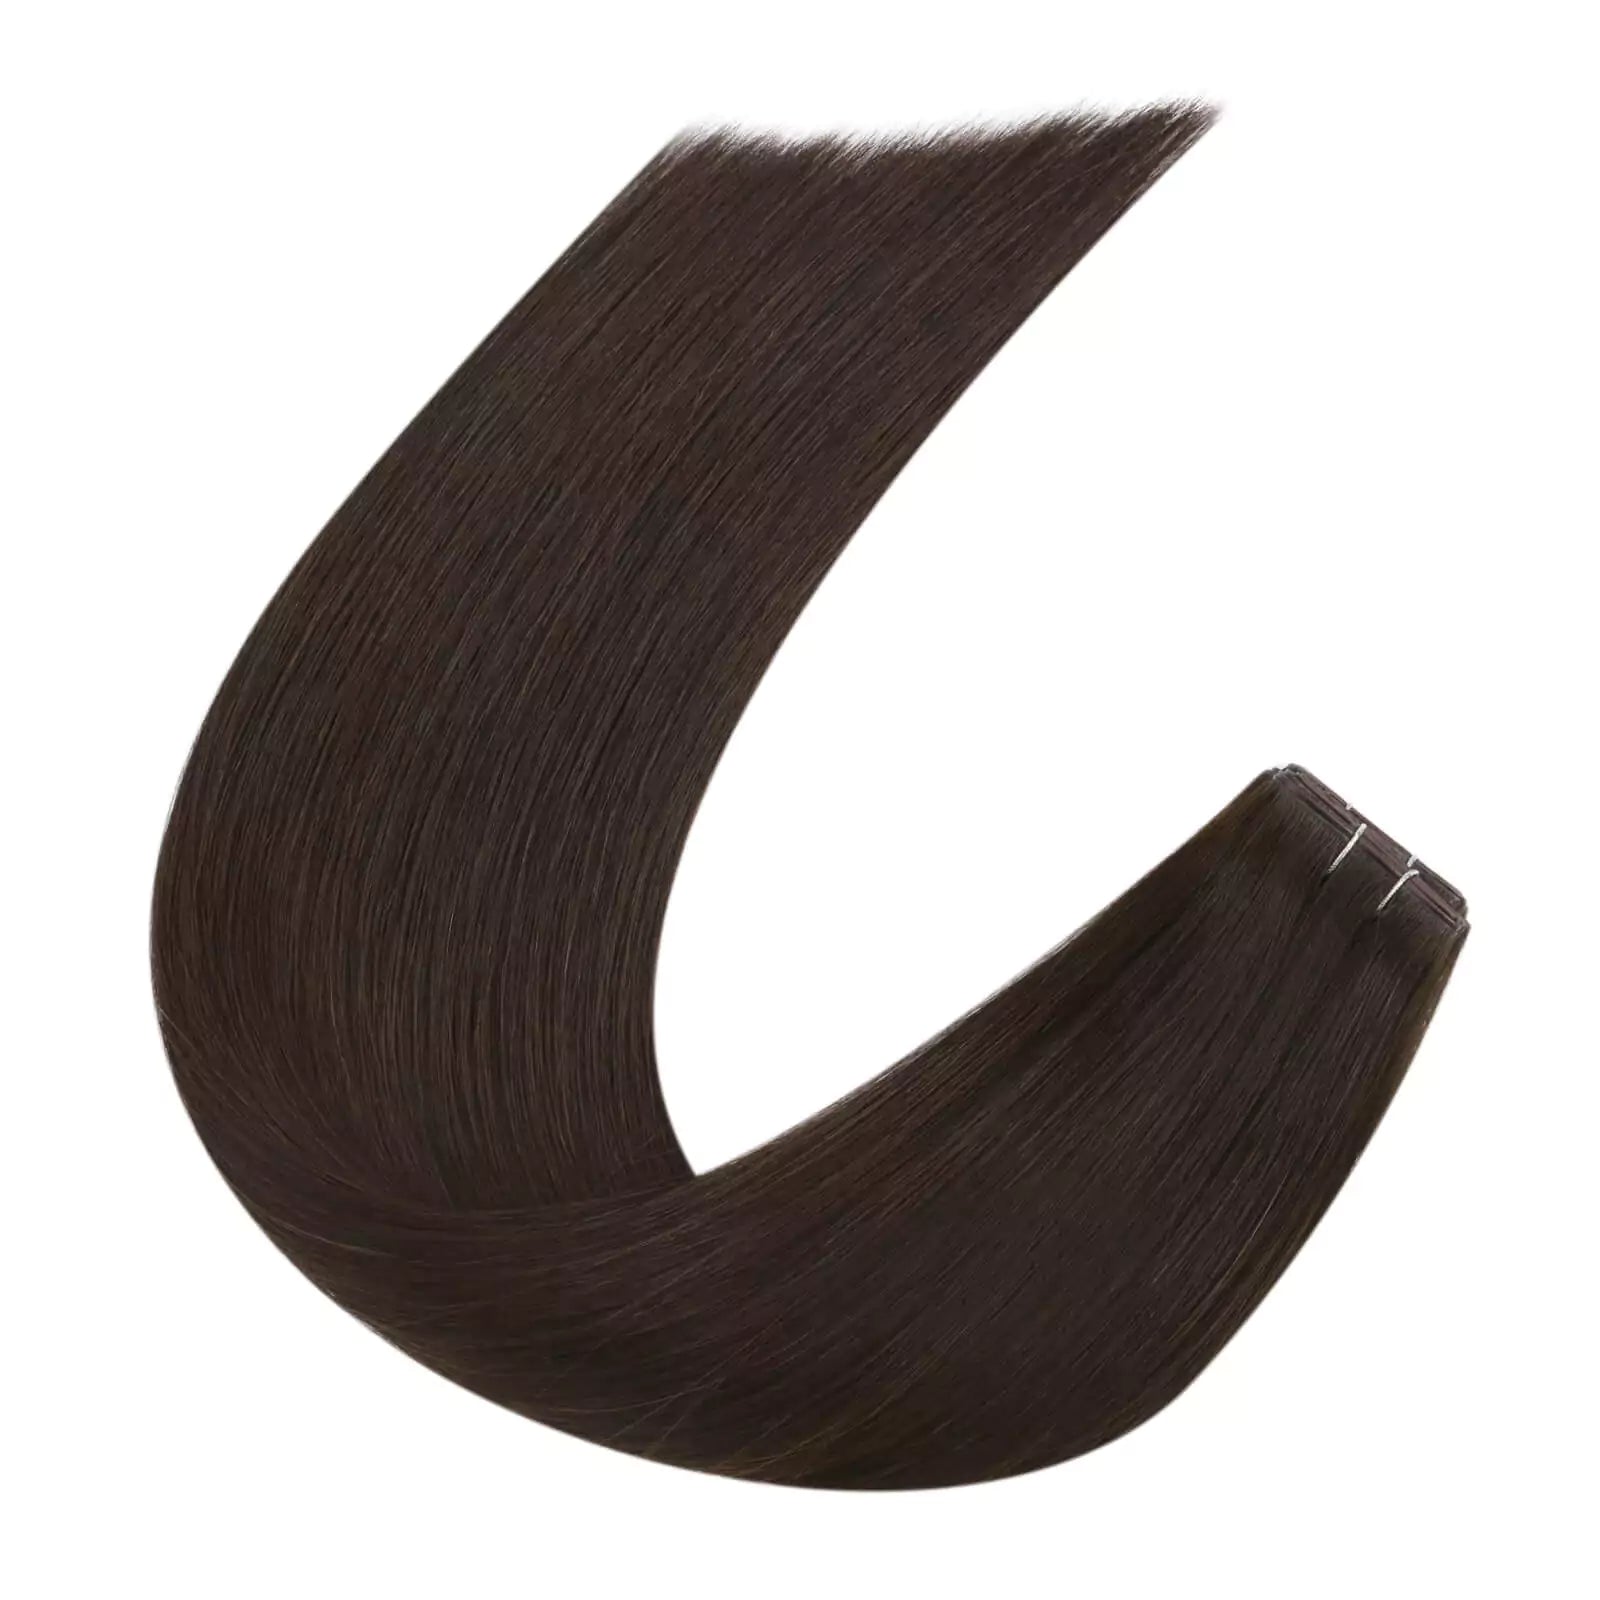 seamless injected PU flat weft hair extensions darkest brown